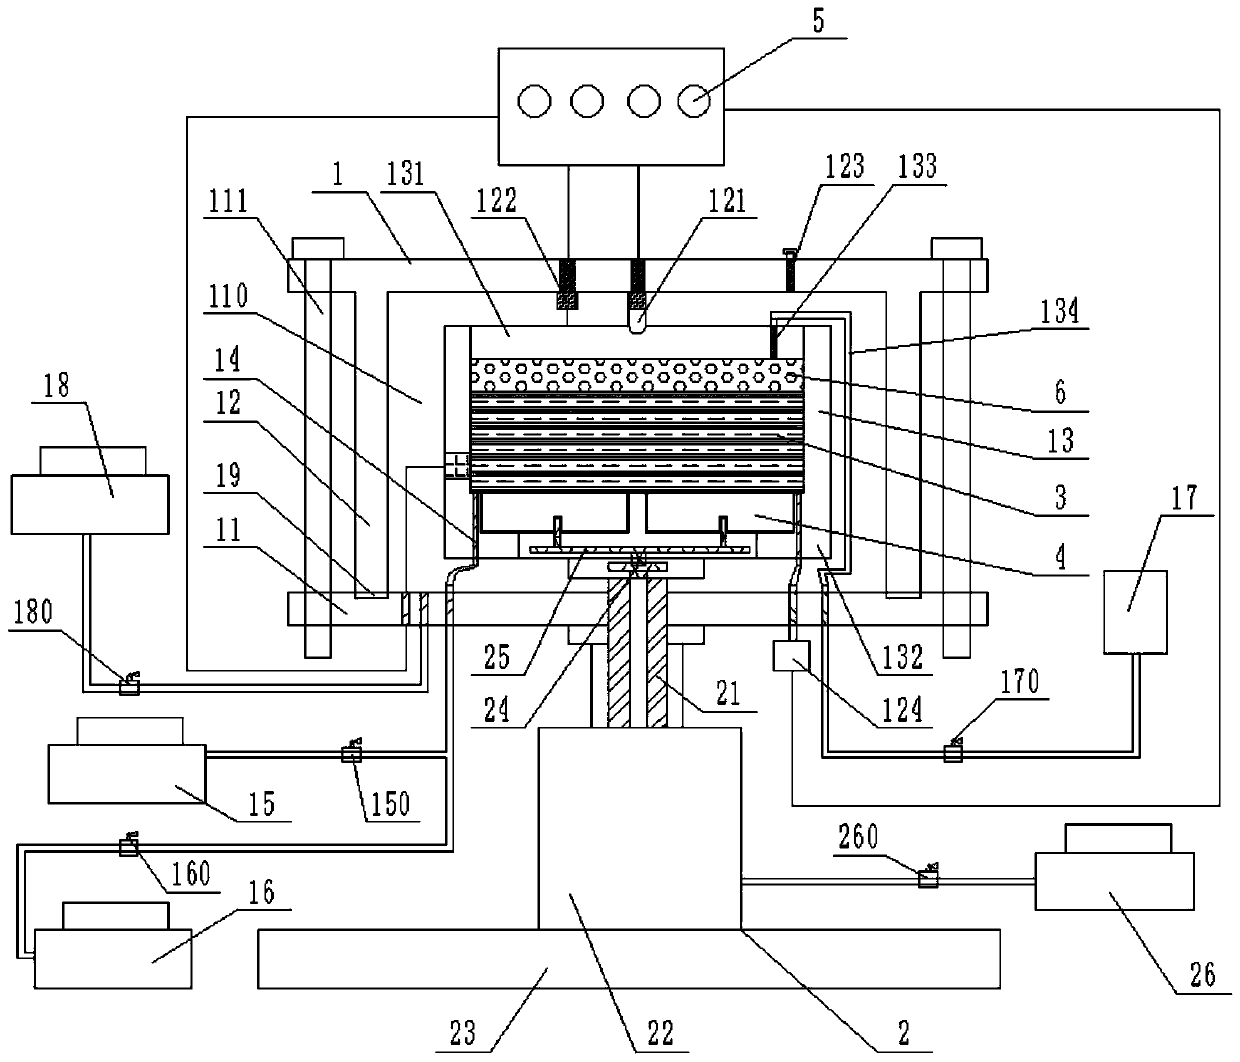 Air-contained soil pile soil testing device